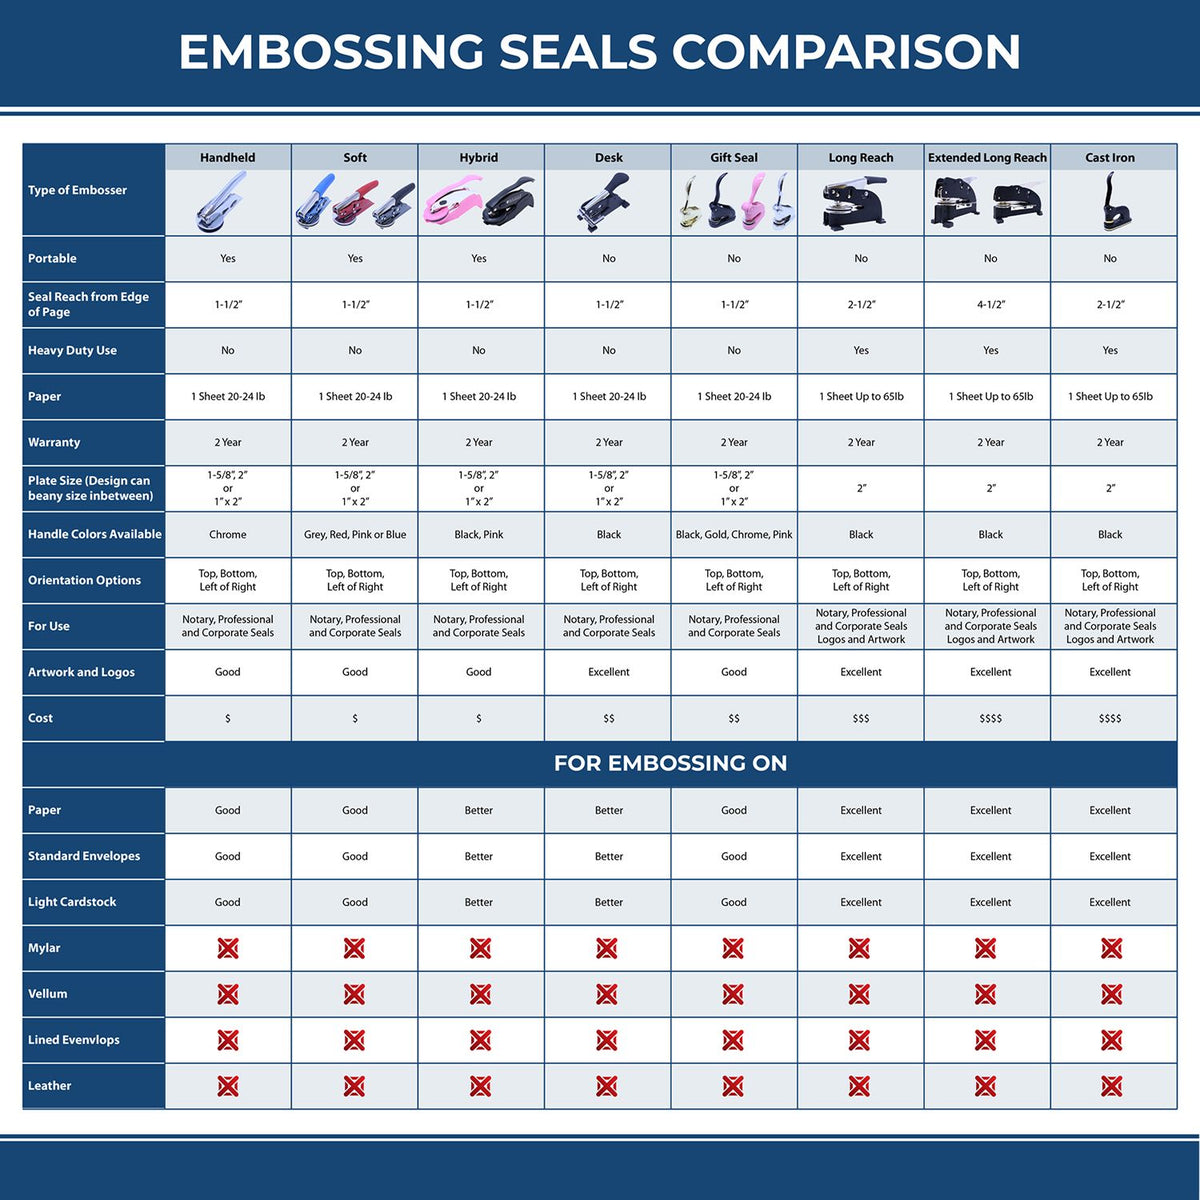 A comparison chart for the different types of mount models available for the Soft Pocket Massachusetts Landscape Architect Embosser.